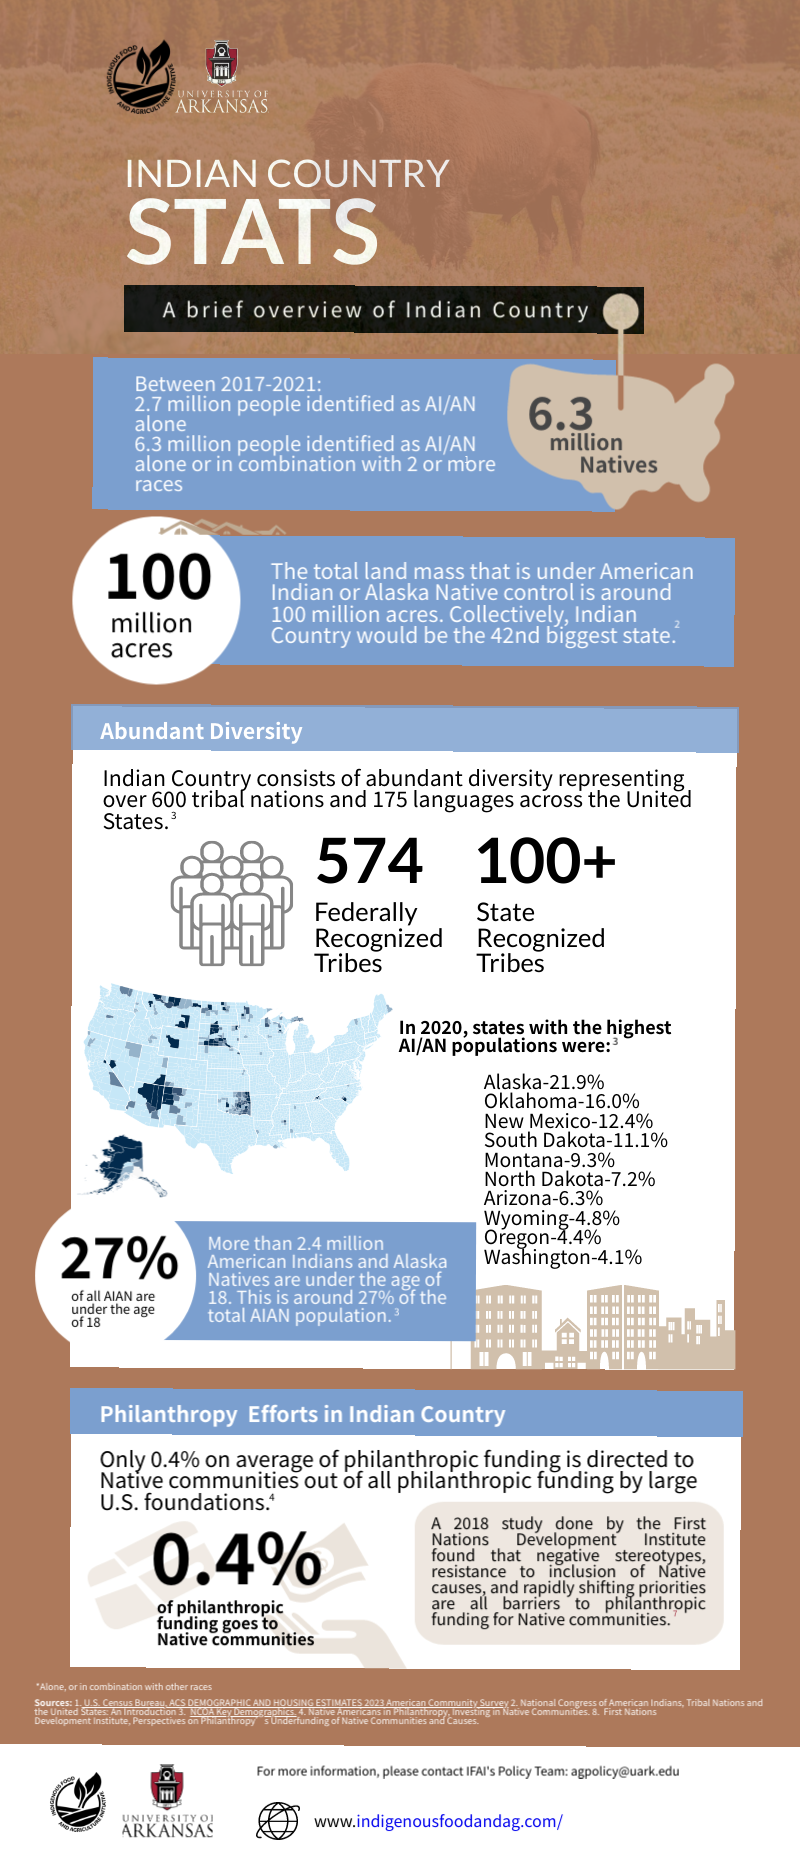 Indain Country Stats - A Brief overview of Indian Country